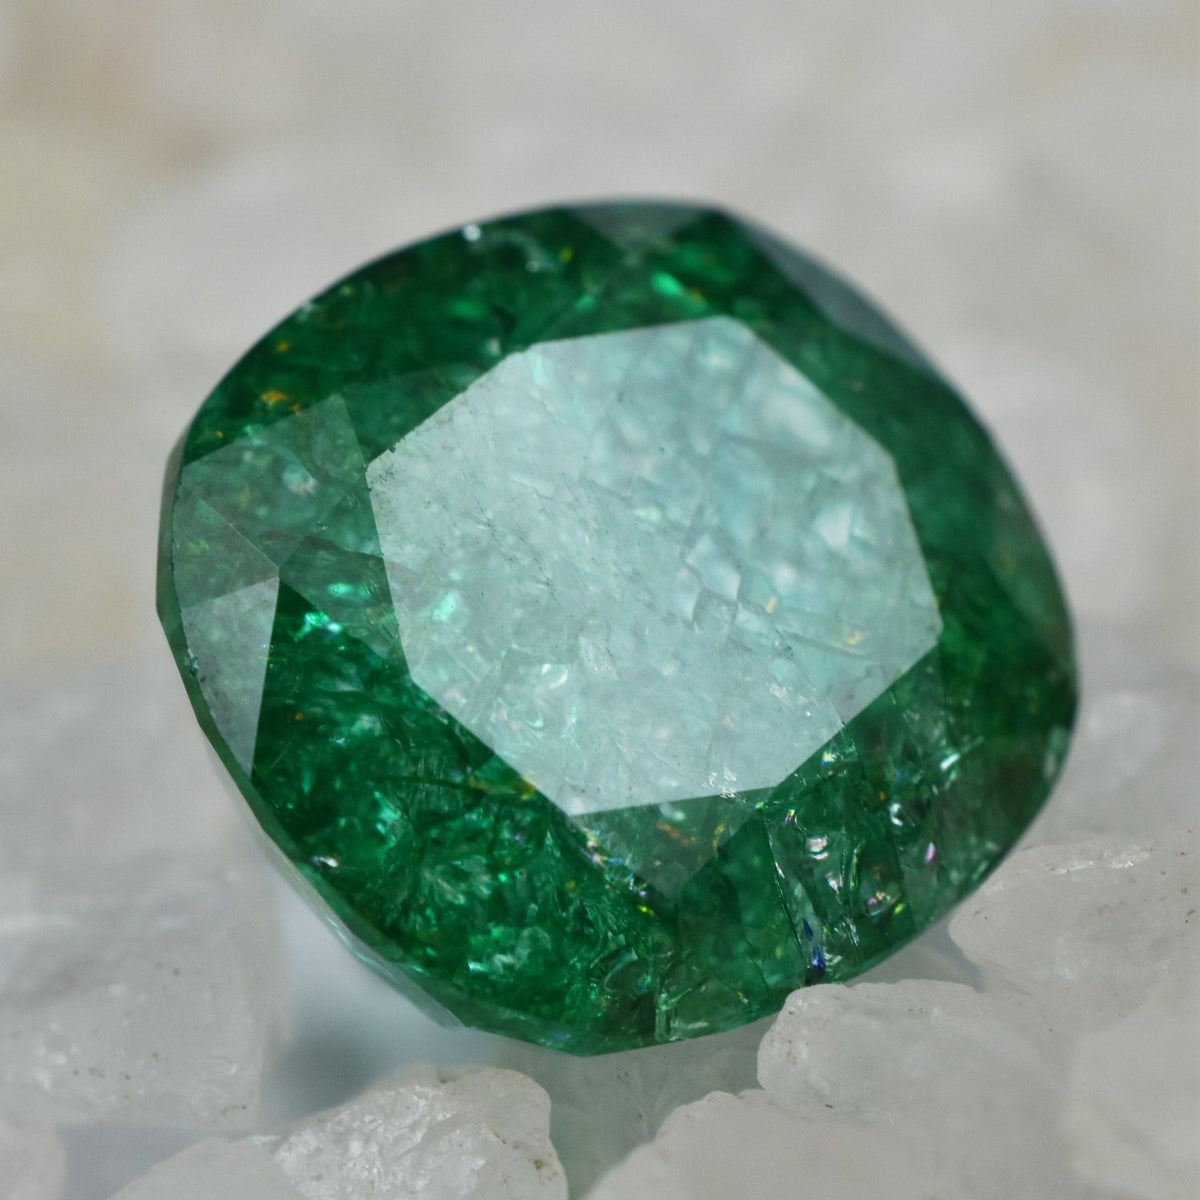 "EMERALD " Beautiful Green Emerald 8.25 Carat Square Cushion Cut Green Emerald Natural Certified Loose Gemstone | Surprise Gift For Wife | Free Delivery Free Gift